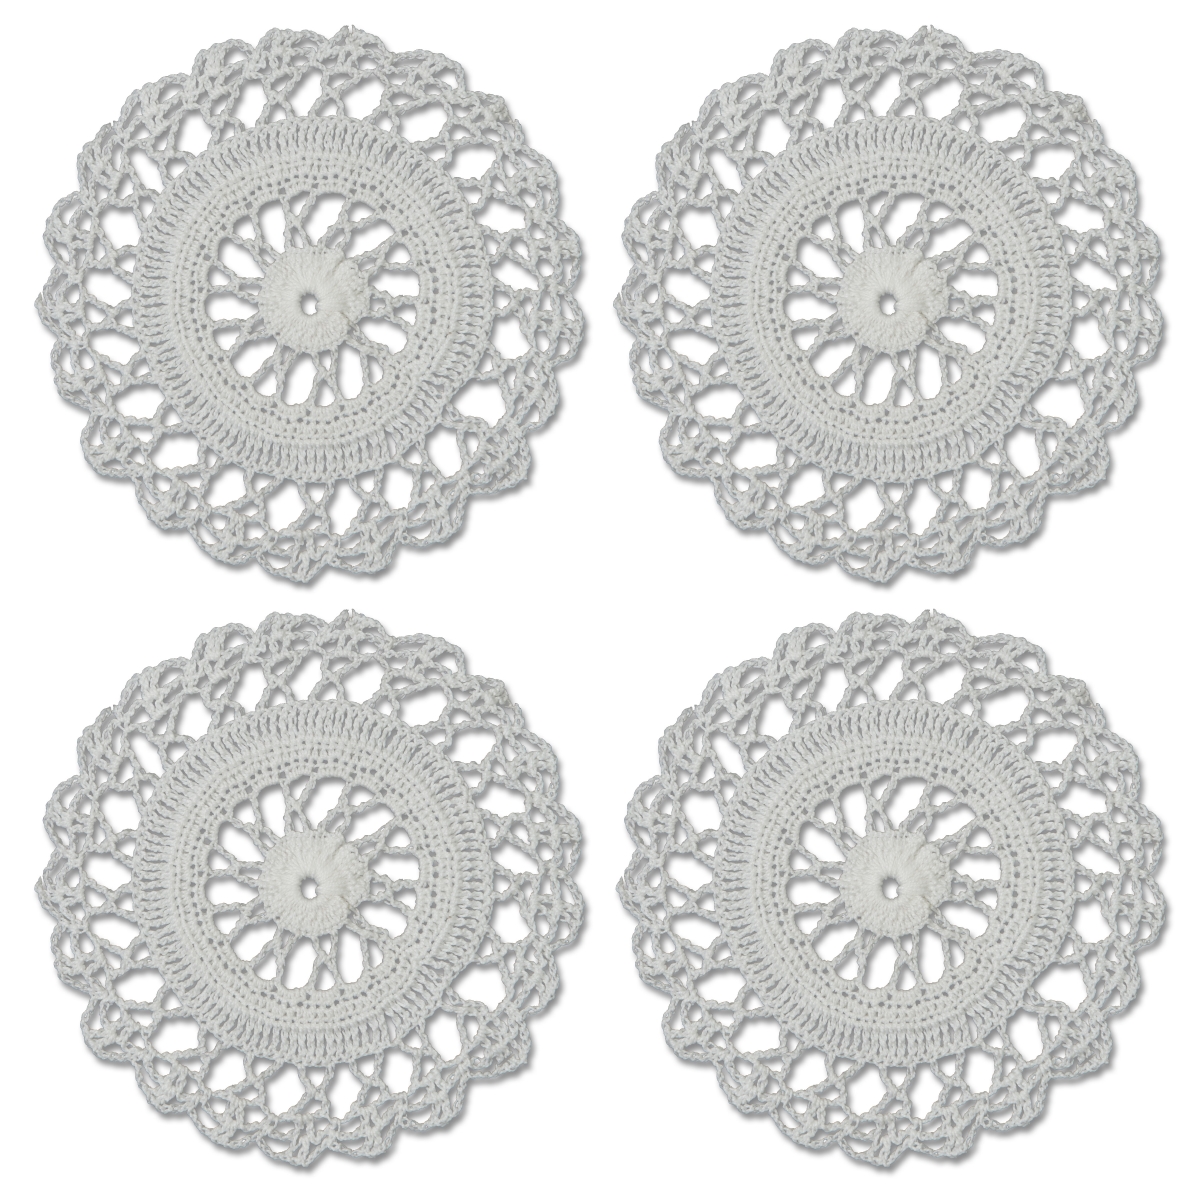 Picture of Heritage Lace CES-0600W-S 6 in. Crochet Envy Sunburst Round Doily - White - Set of 4